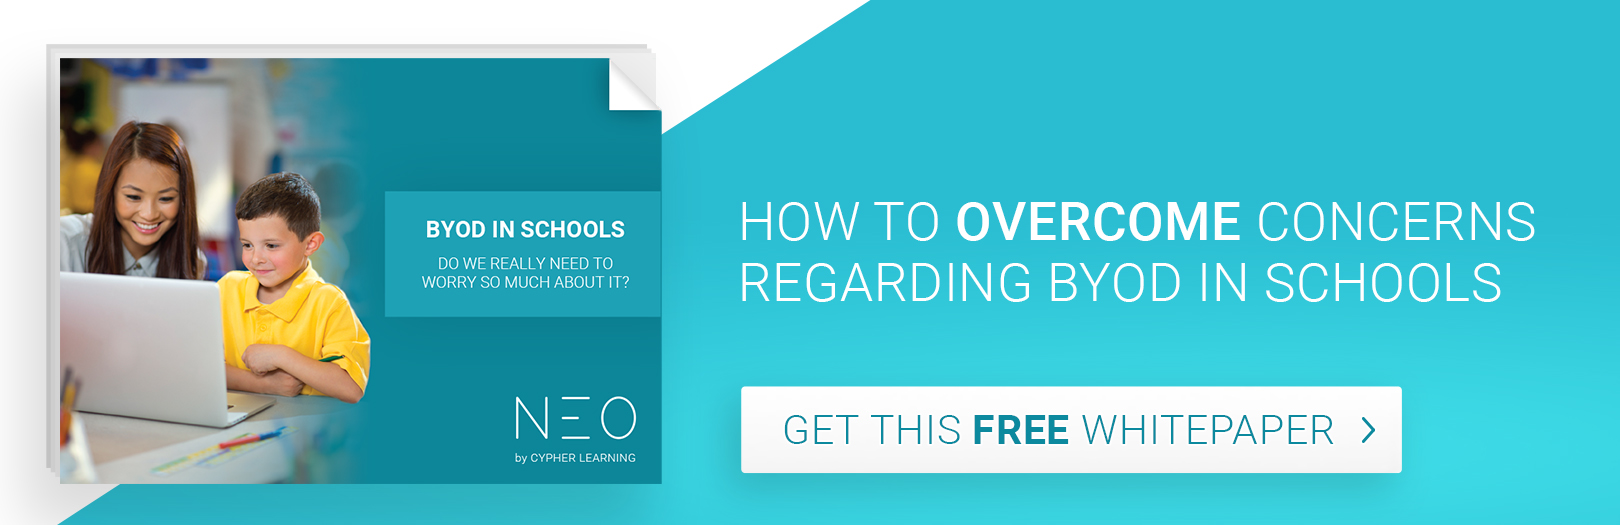 Download our whitepaper about BYOD Concerns and How to Overcome Them!